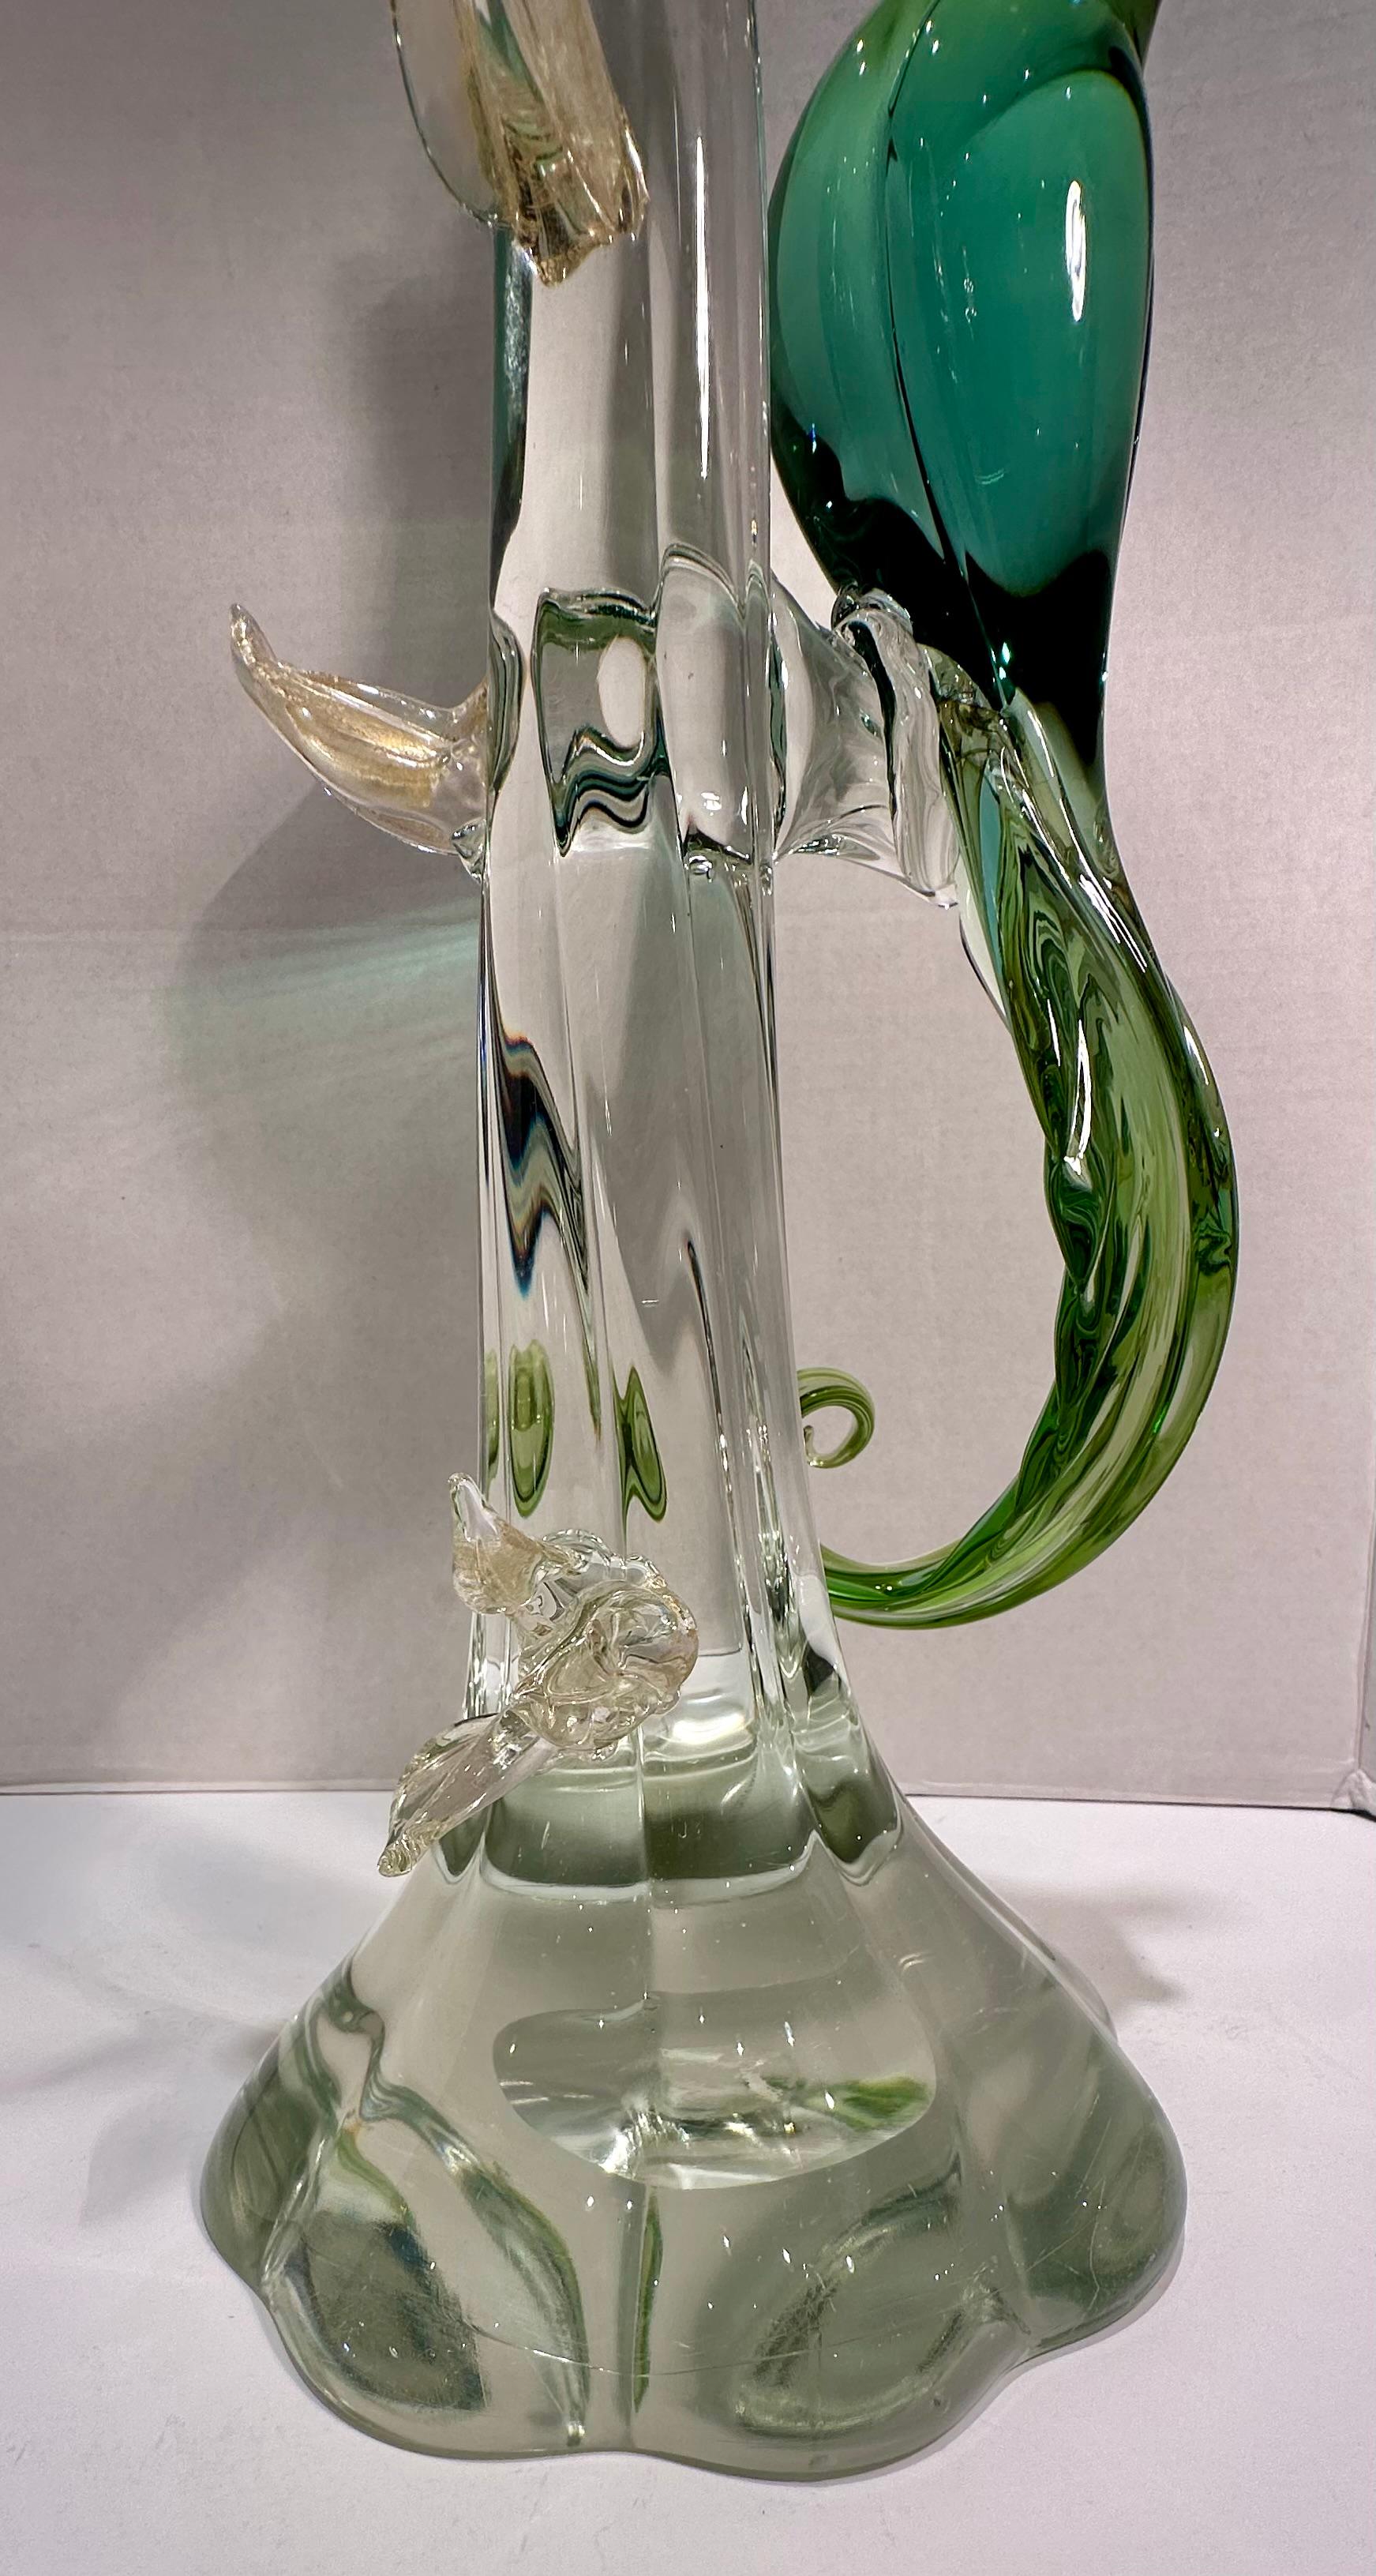  Large Salviati Italy Murano Glass Exotic Bird Figurine in Shades of Green  For Sale 2